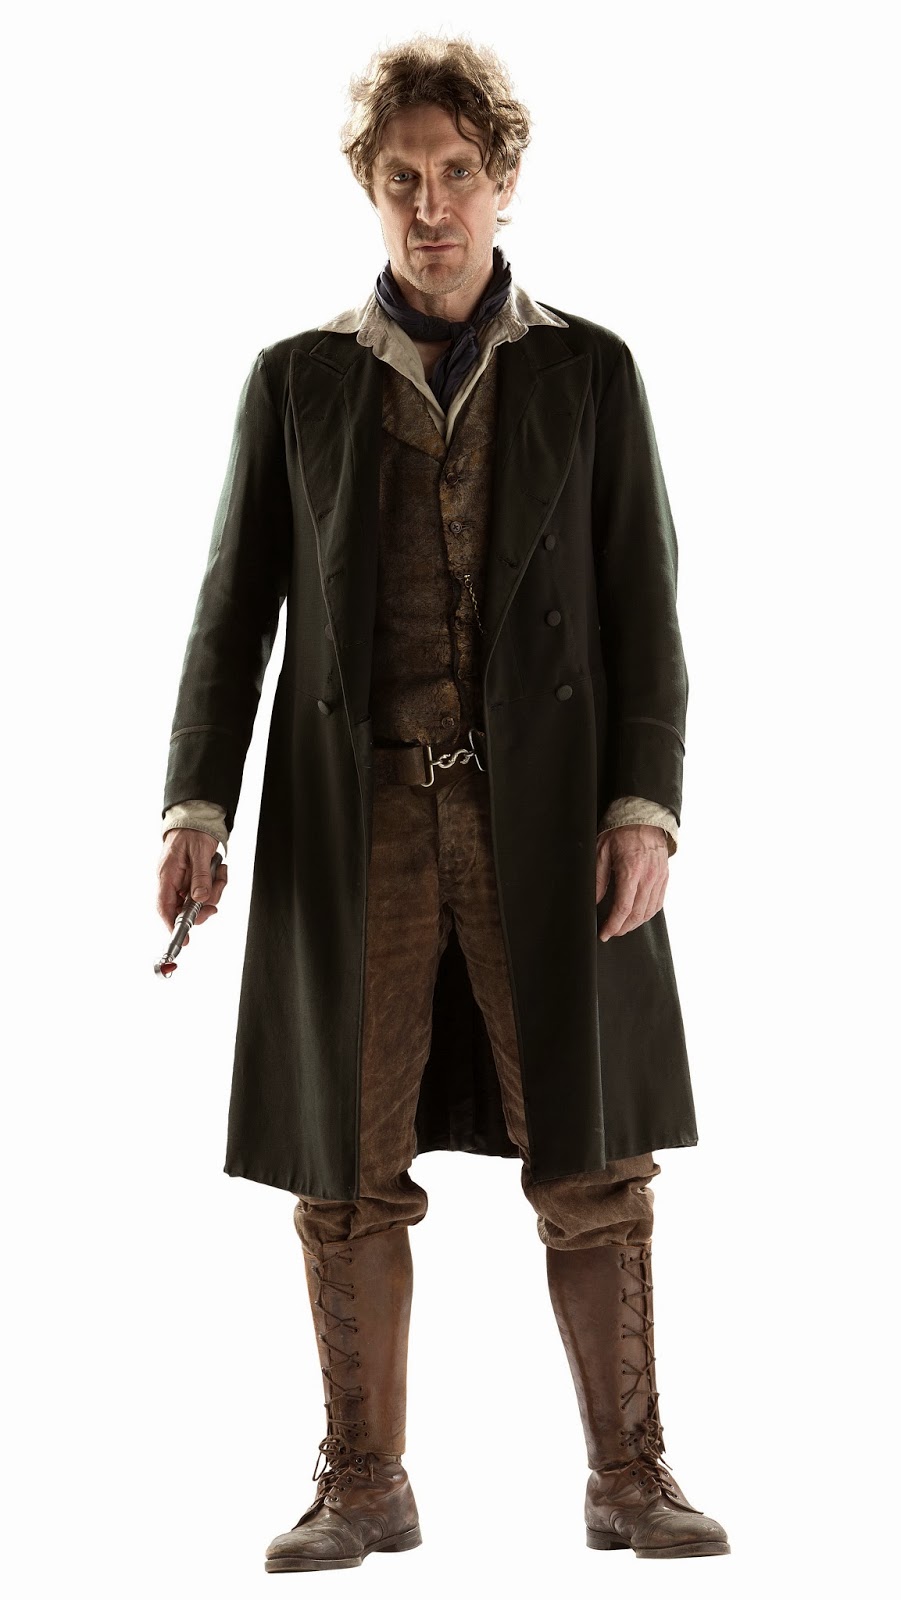 Paul McGann as The Eighth Doctor in "The Night of the Doctor."